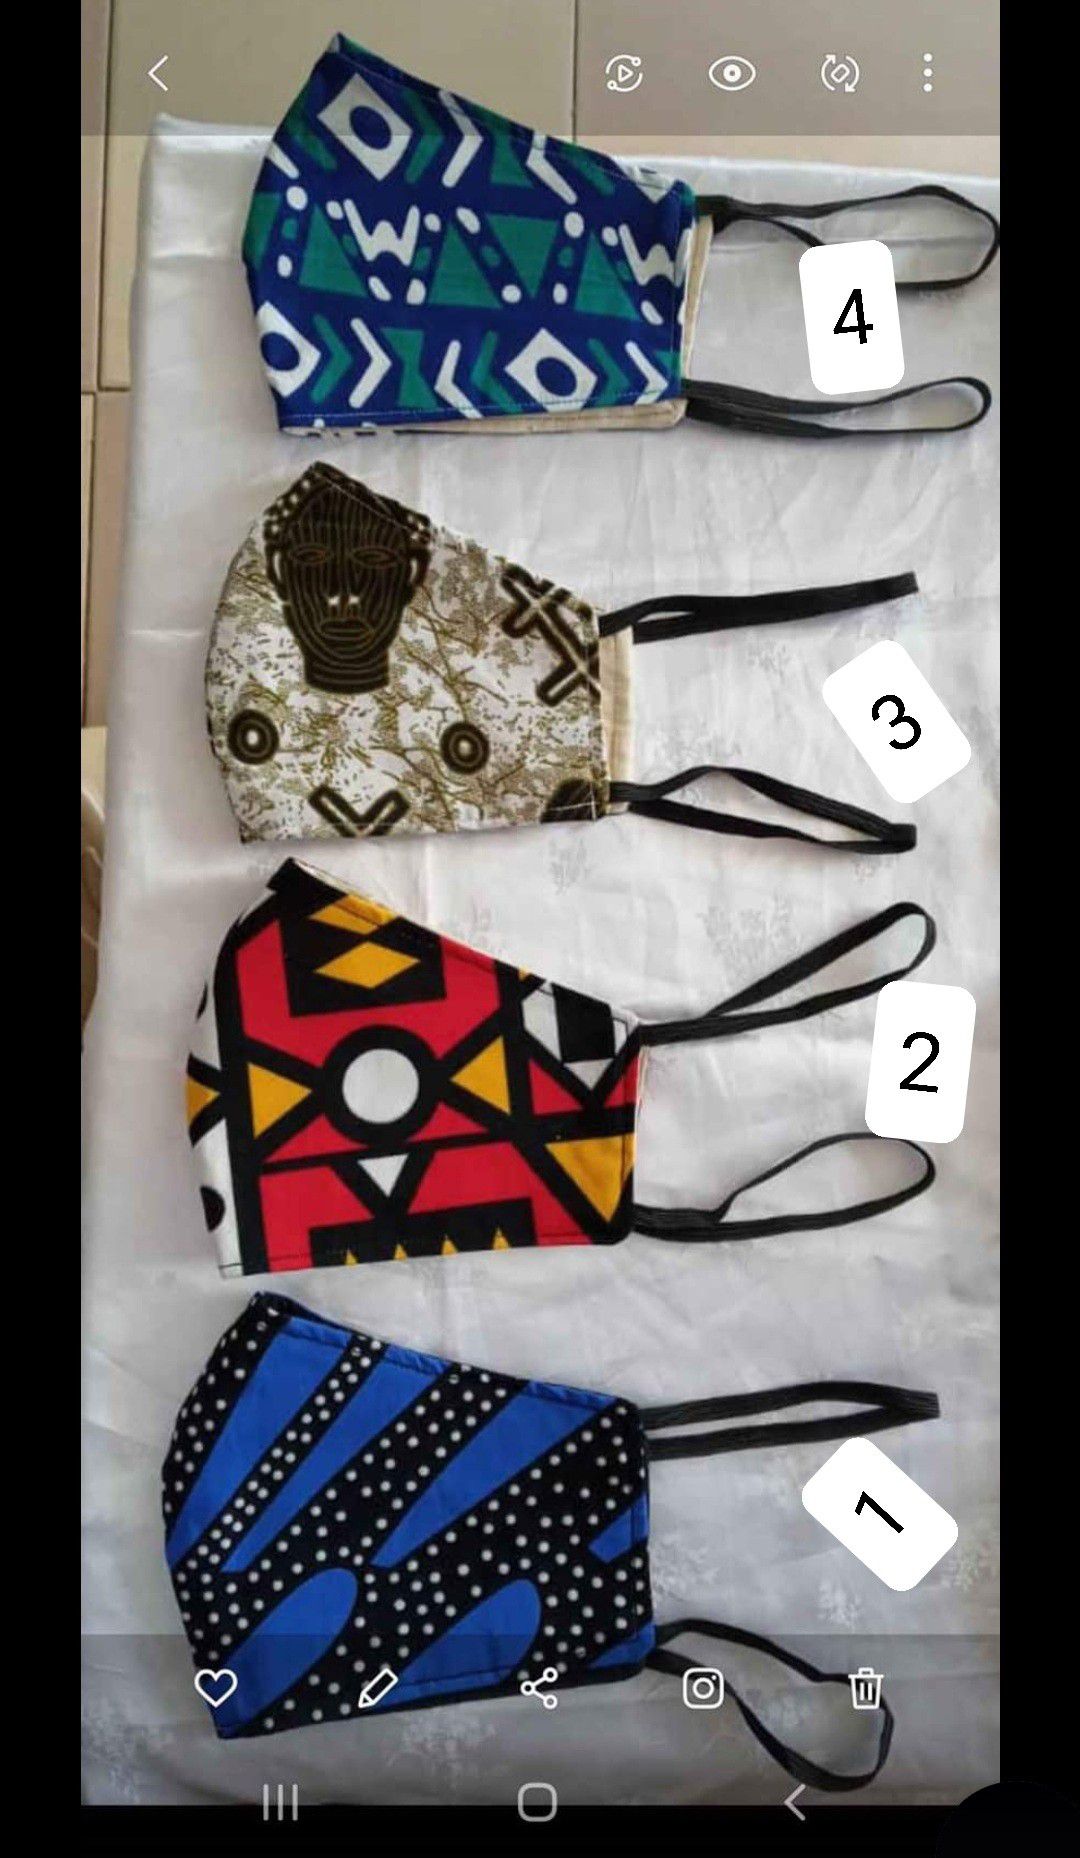 Unisex high quality African print face masks